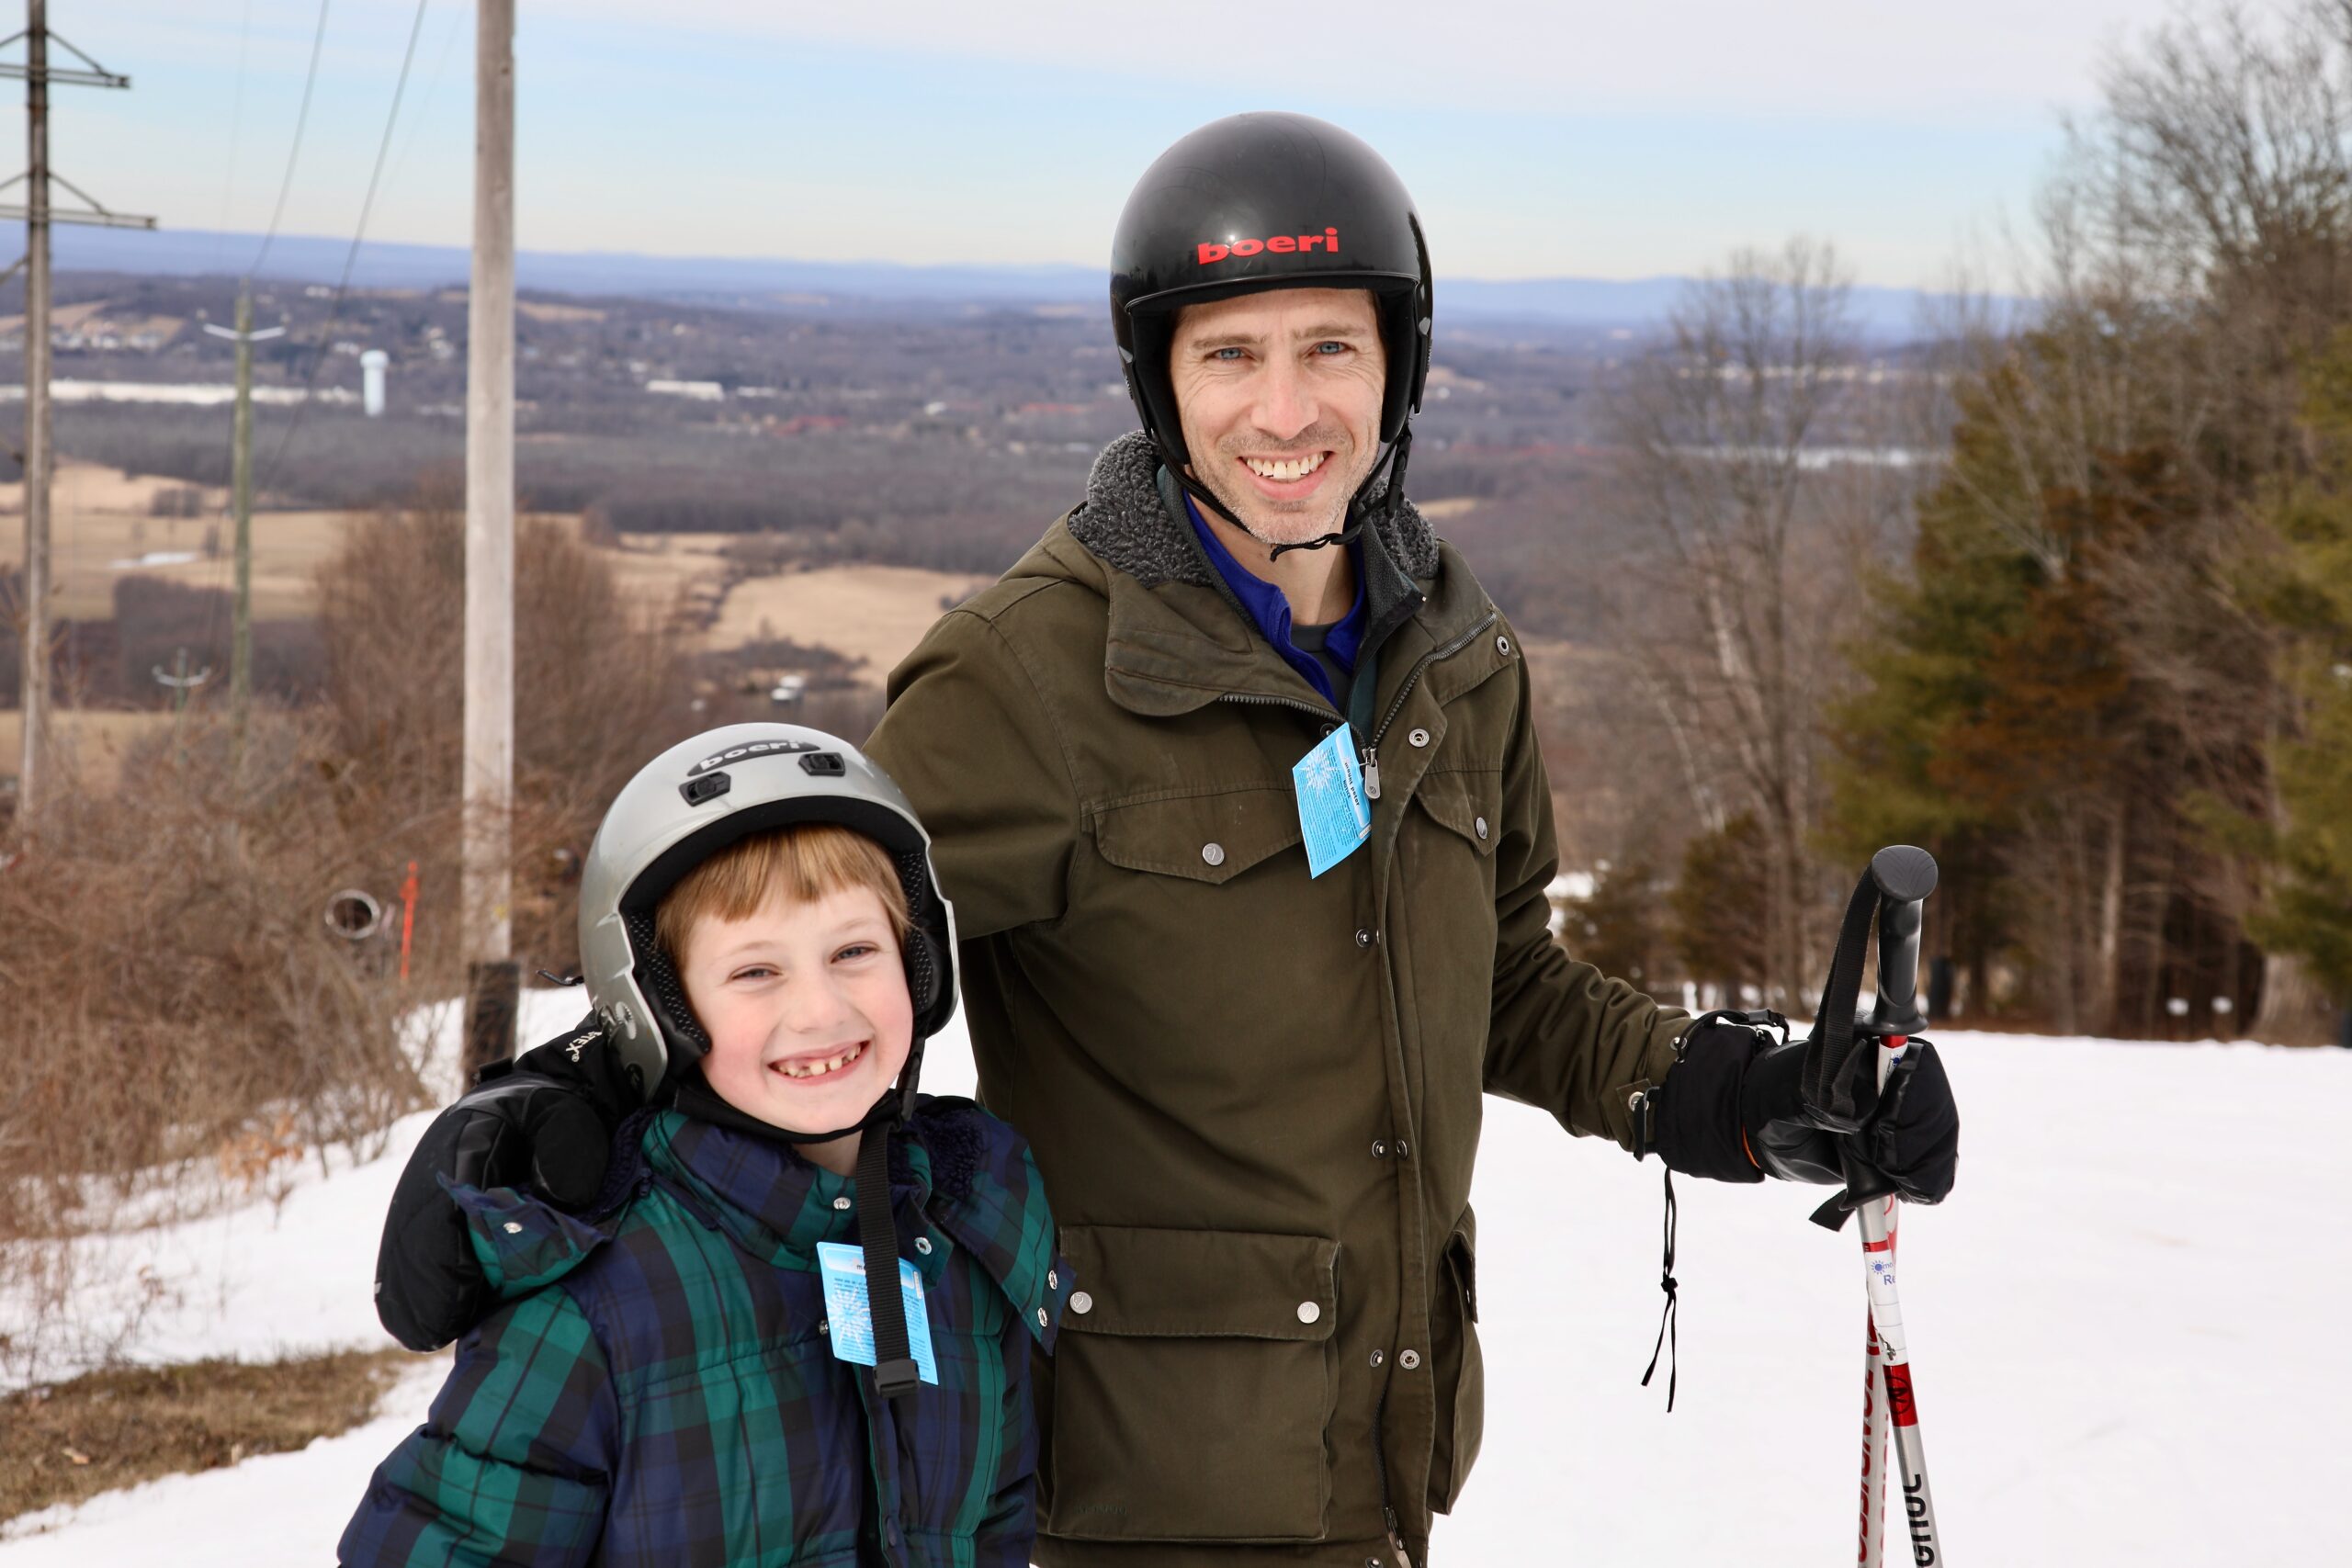 Family time with season passes at mount peter